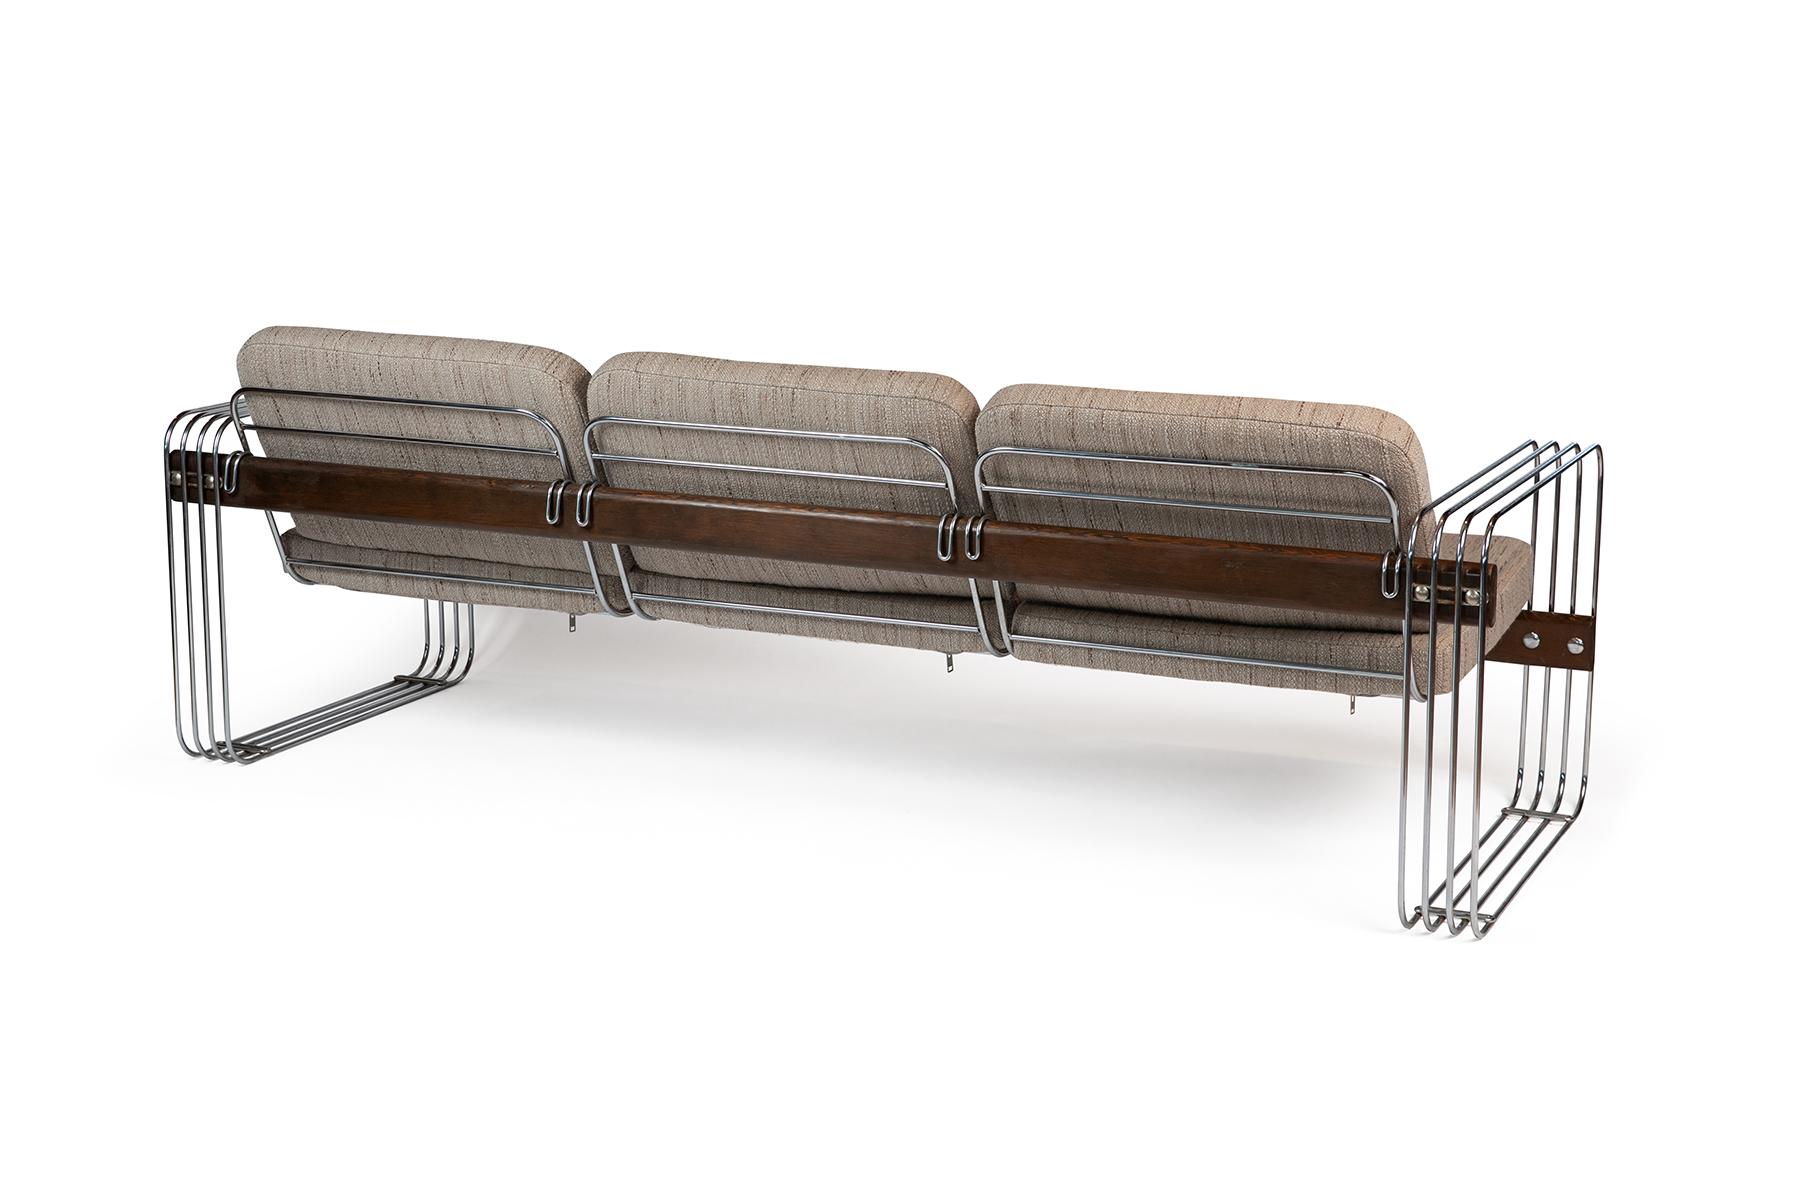 American Stendig Sofa with Polished Steel and Sculptural Wood